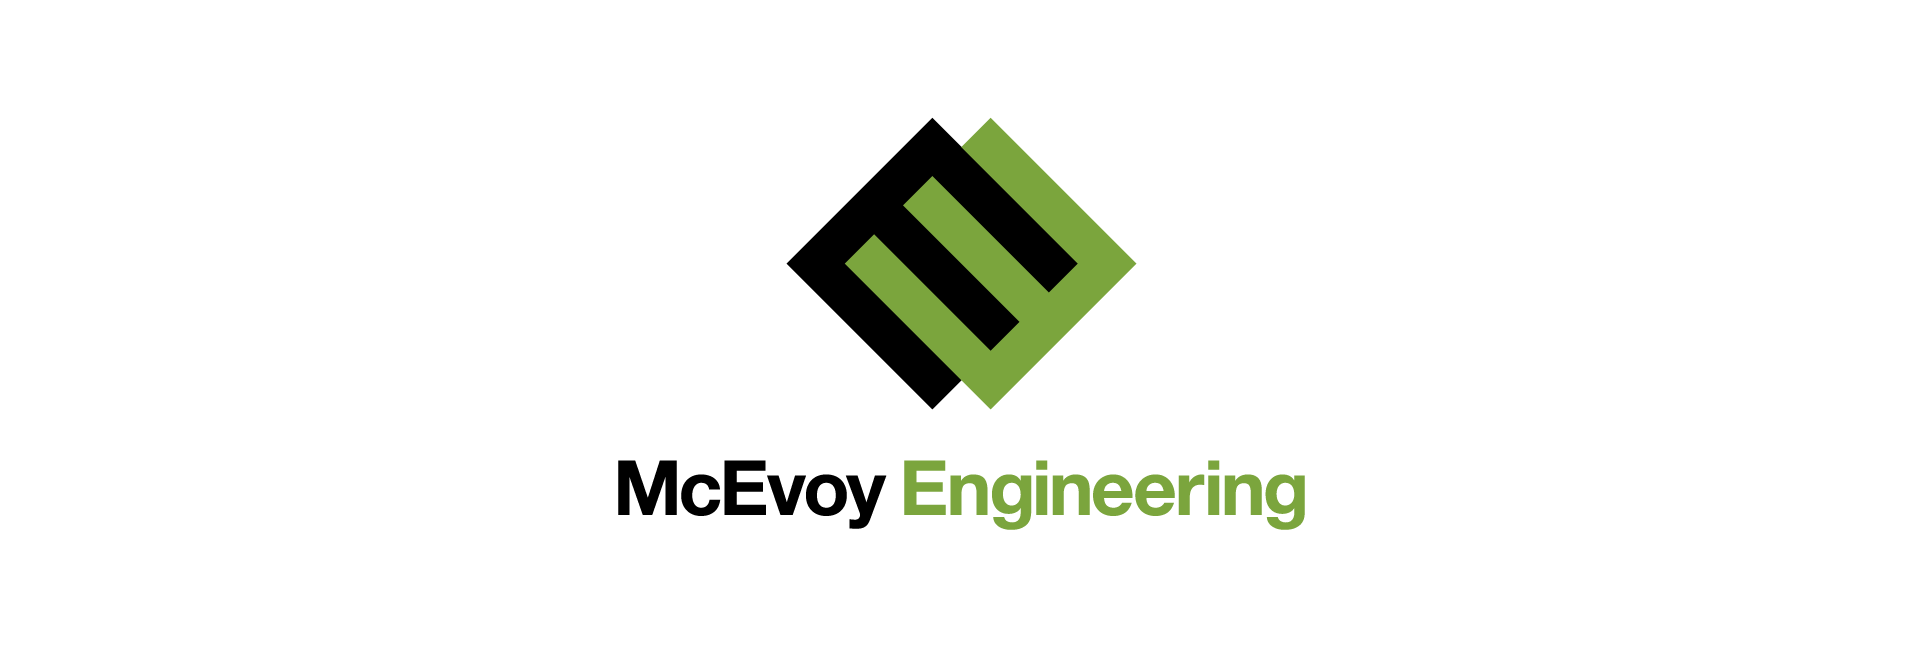 a green and black logo for mcevoy engineering